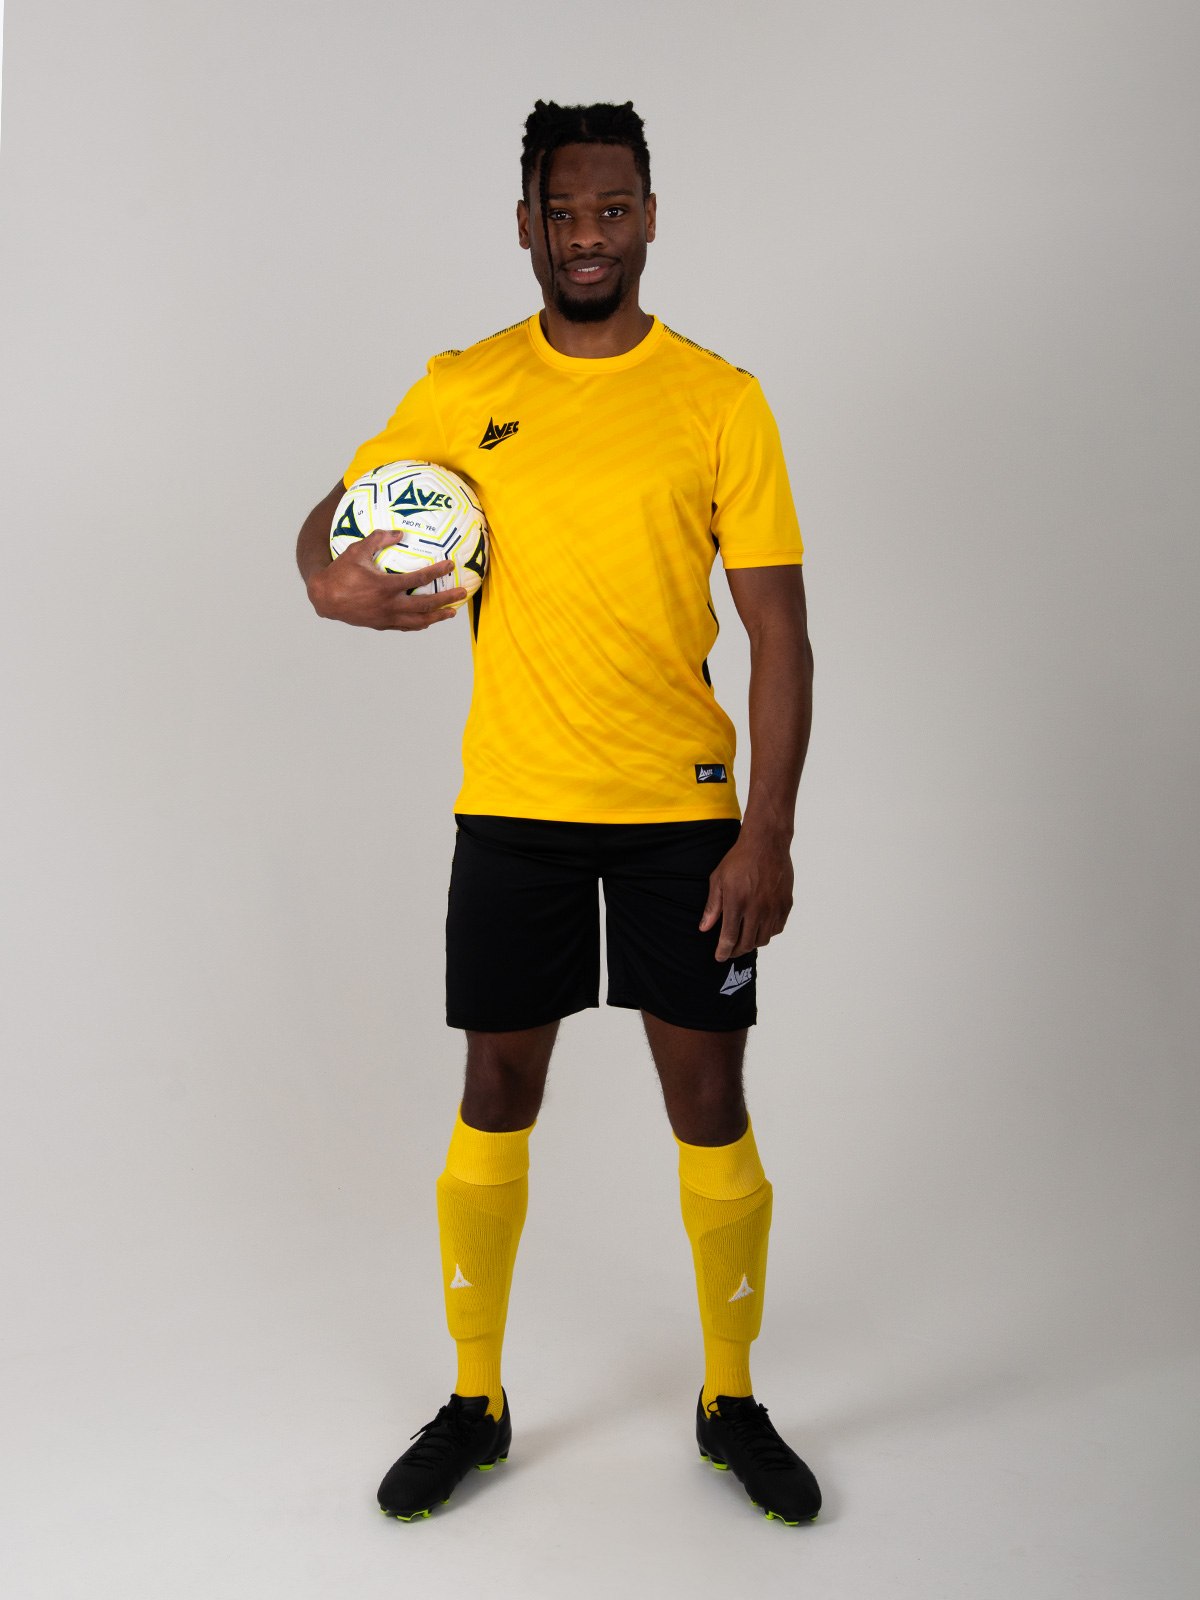 a man is wearing a yellow football kit, but has black shorts in this combination.